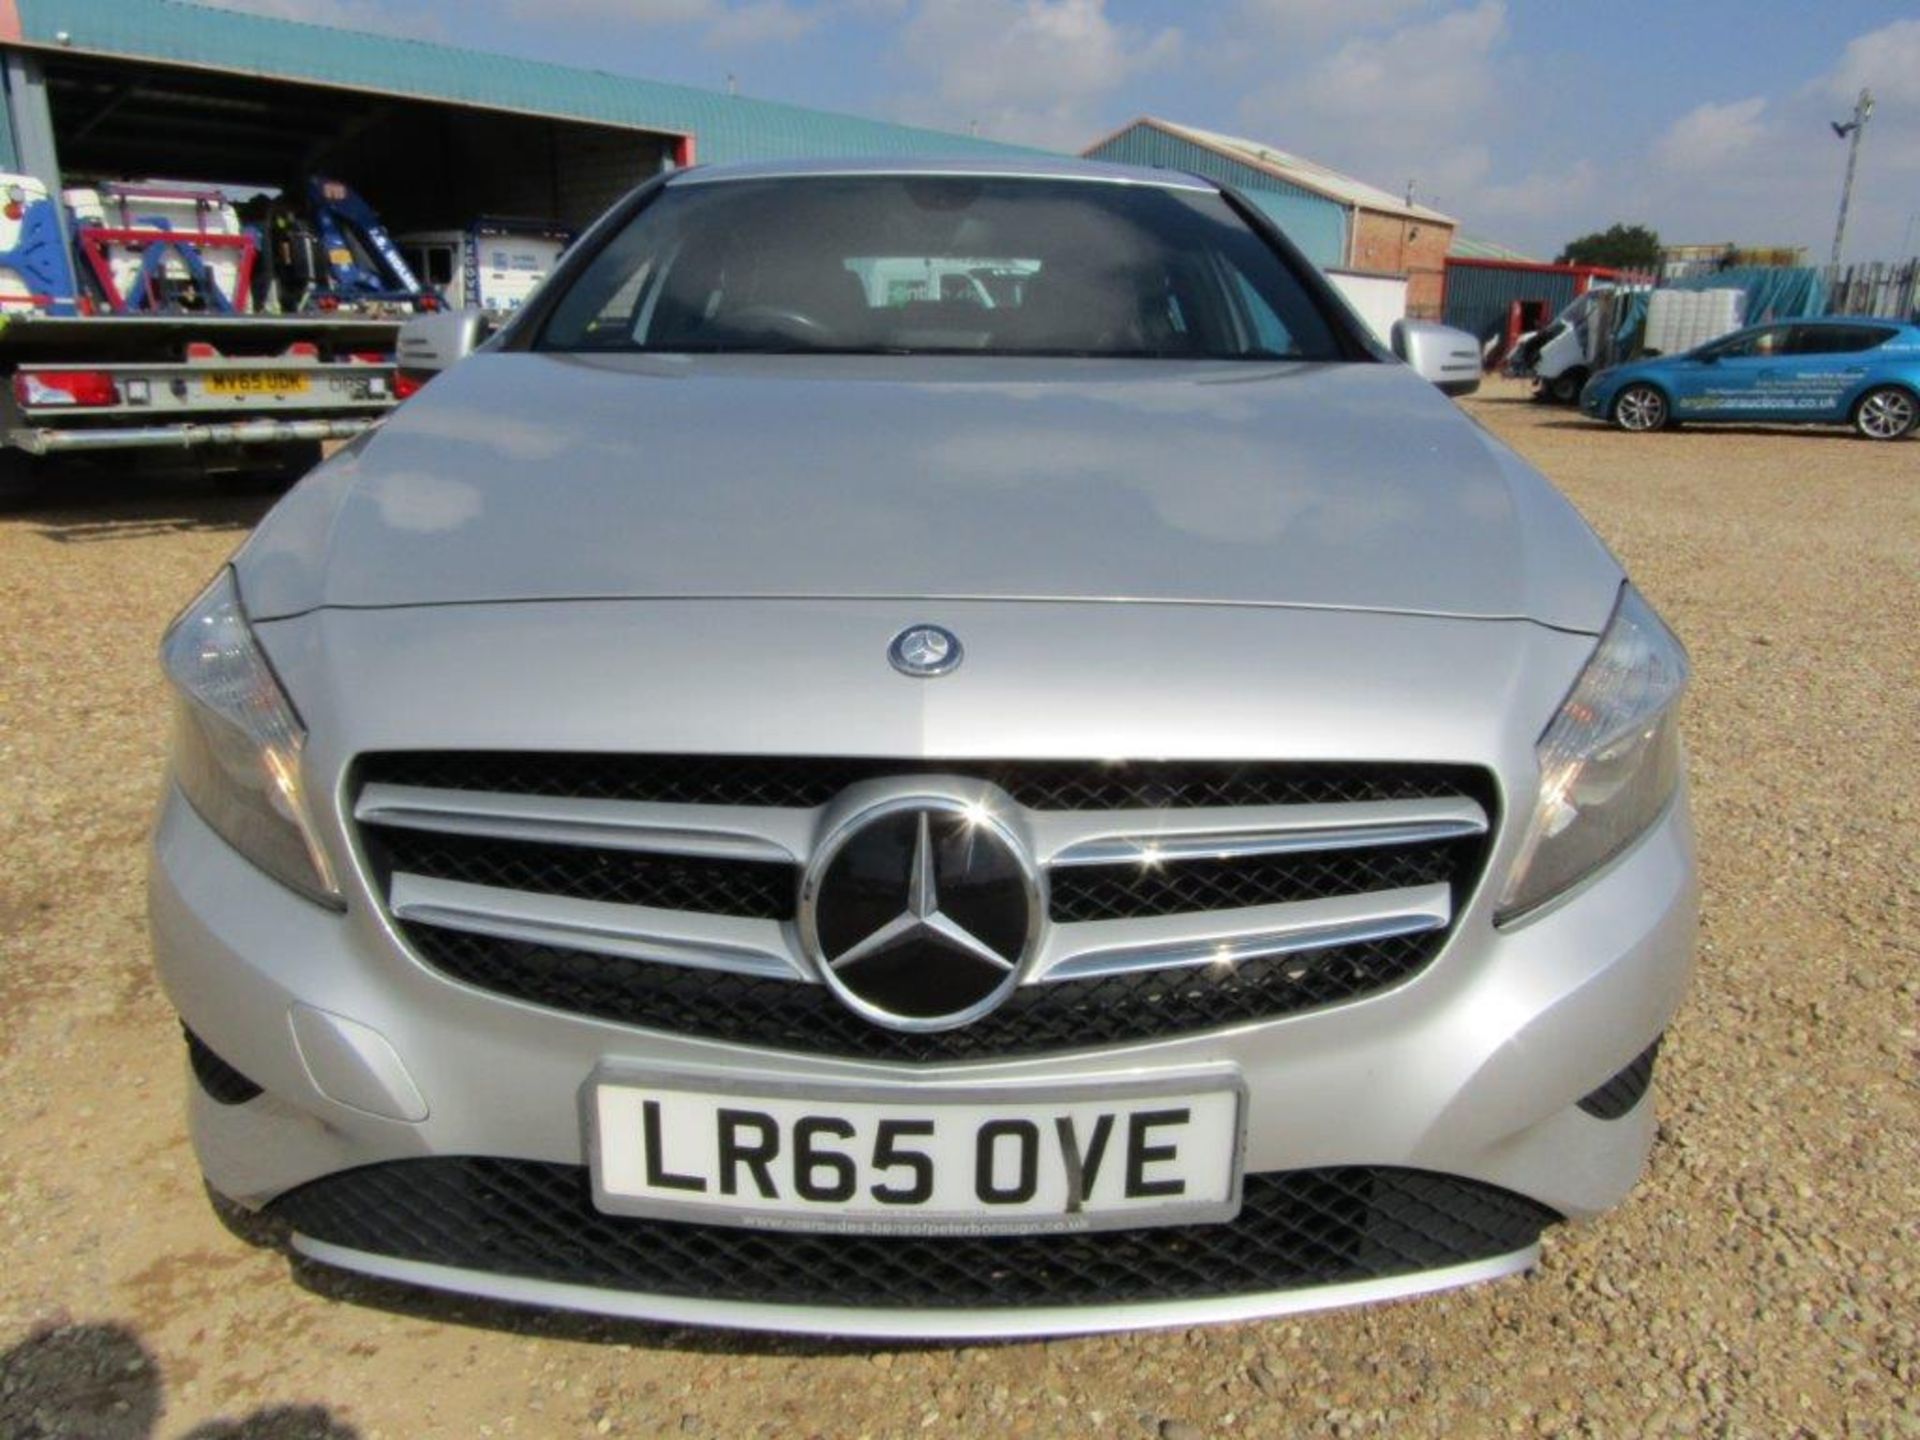 65 15 Mercedes A200 Sport CDI - Image 3 of 22